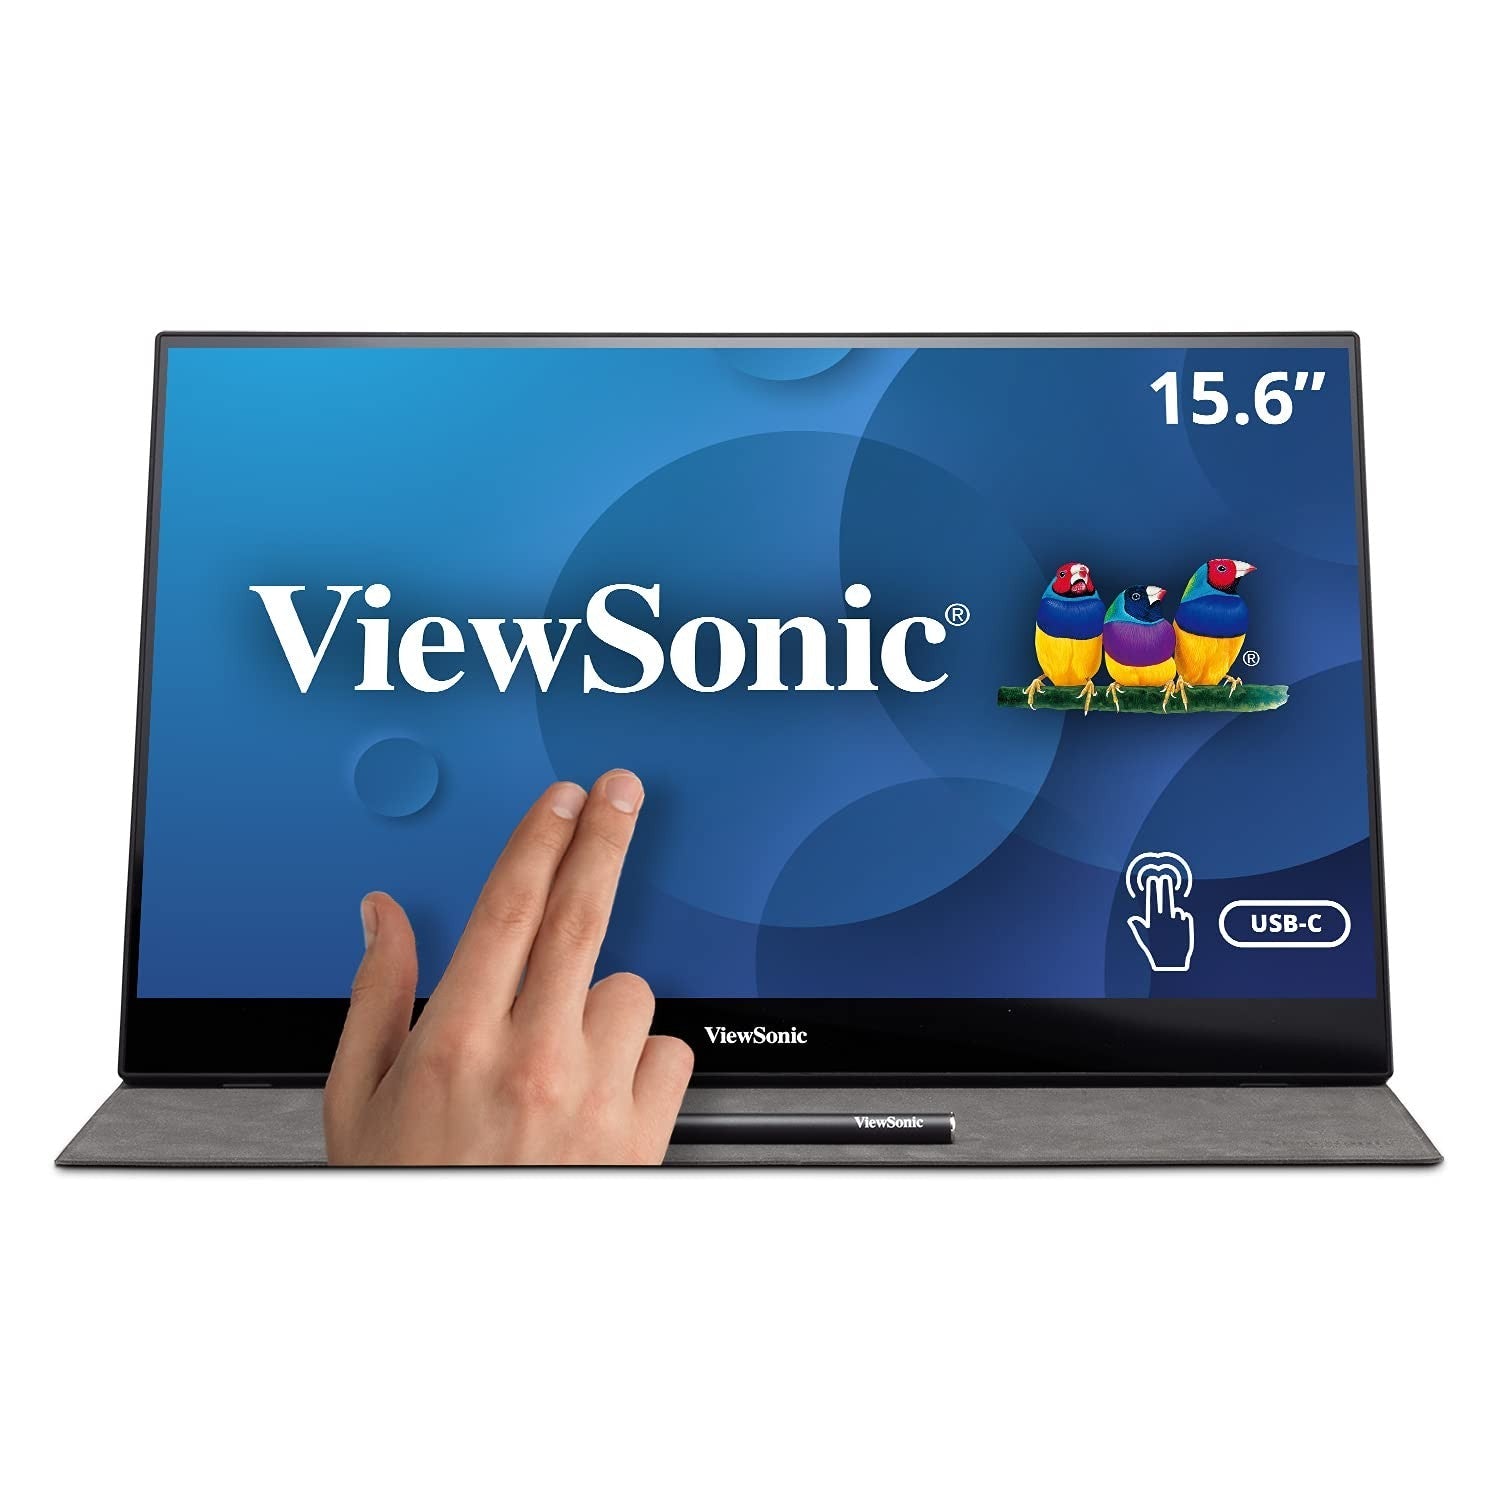 Viewsonic TD1655 | 15.6" 10 Point Touch 1080P Display